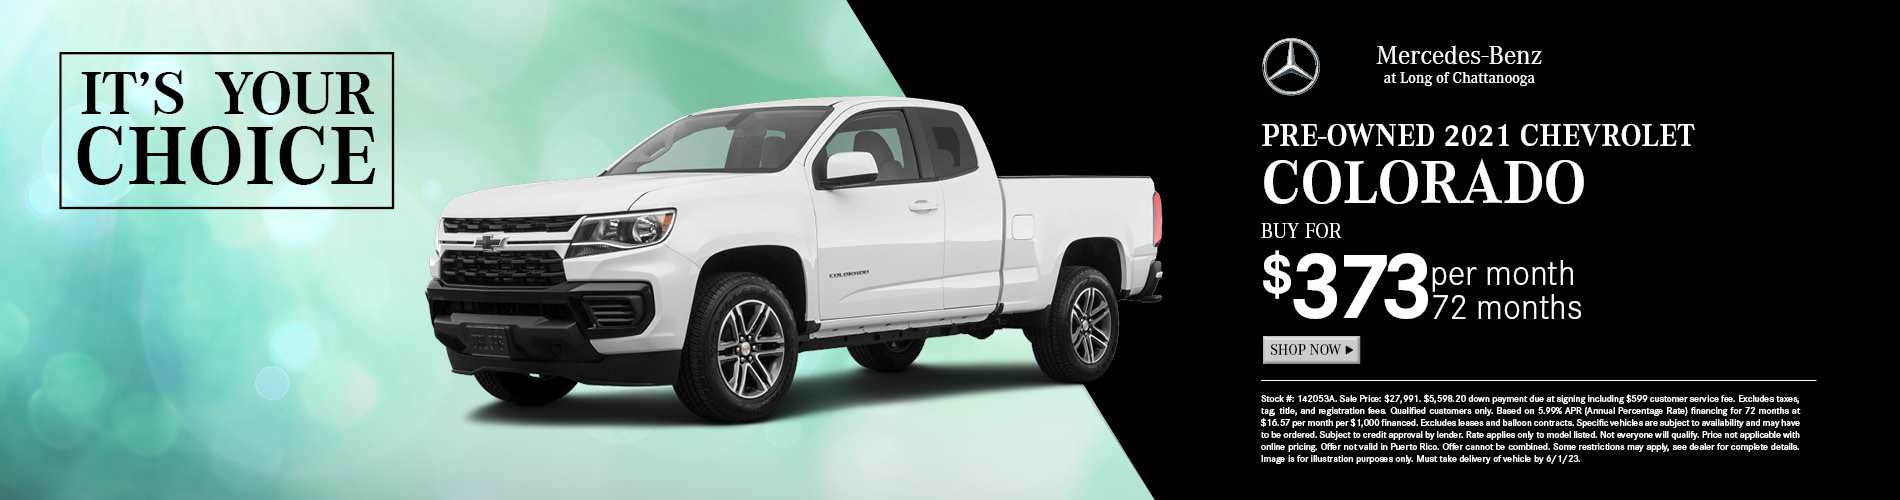 Certified Pre-Owned Chevrolet Colorado